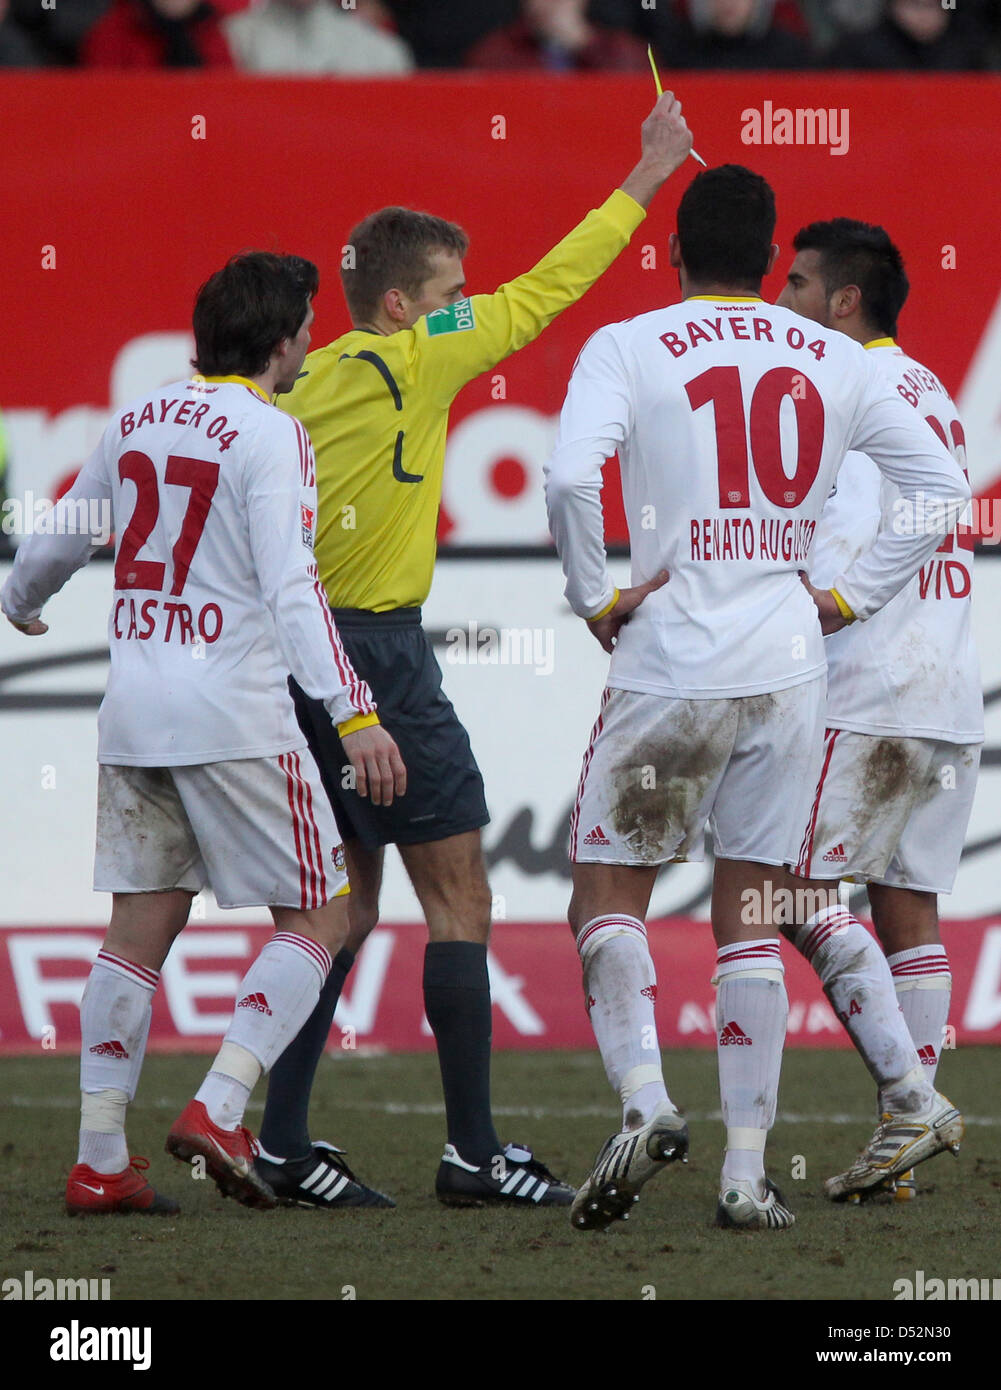 Referee Jochen Drees (2-L) shows Leverkusen's Arturo Vidal (R) the yellow card during German Bundesliga match Nuremberg vs Bayer Leverkusen at easyCredit-Stadium in Nuremberg, Germany, 07 March 2010. The match ended 3-2. Also depicted are Leverkusen's Gonzalo Castro (L) and Renato Augusto. Photo: DANIEL KARMANN (ATTENTION: EMBARGO CONDITIONS: The DFL permits the further utilisation Stock Photo